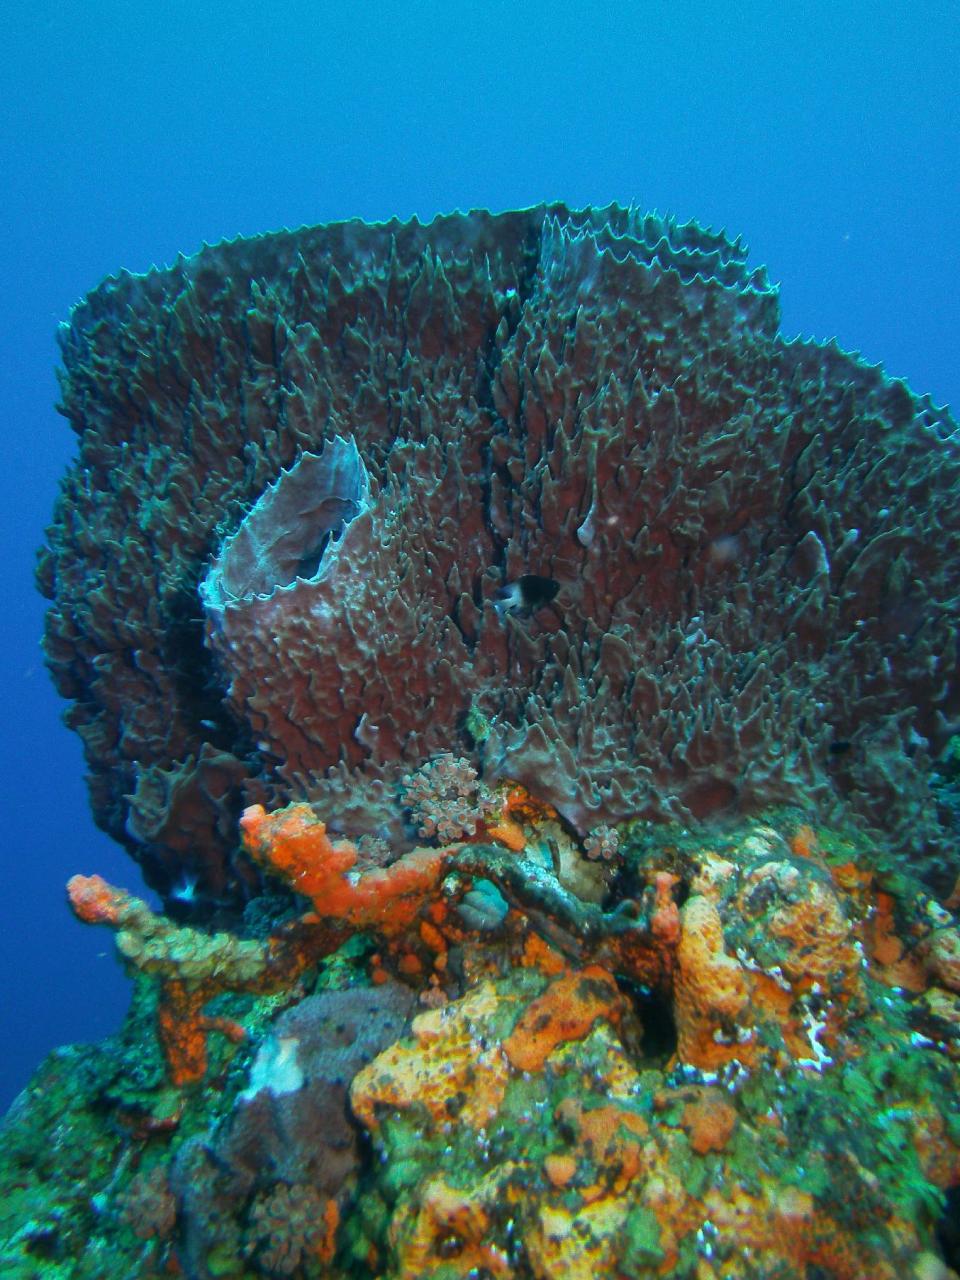 This May 3, 2012 photo shows a giant barrel sponge in the Saba Marine Park in Saba in the Caribbean. Saba is a Dutch municipality popular with divers. (AP Photo/Brian Witte)